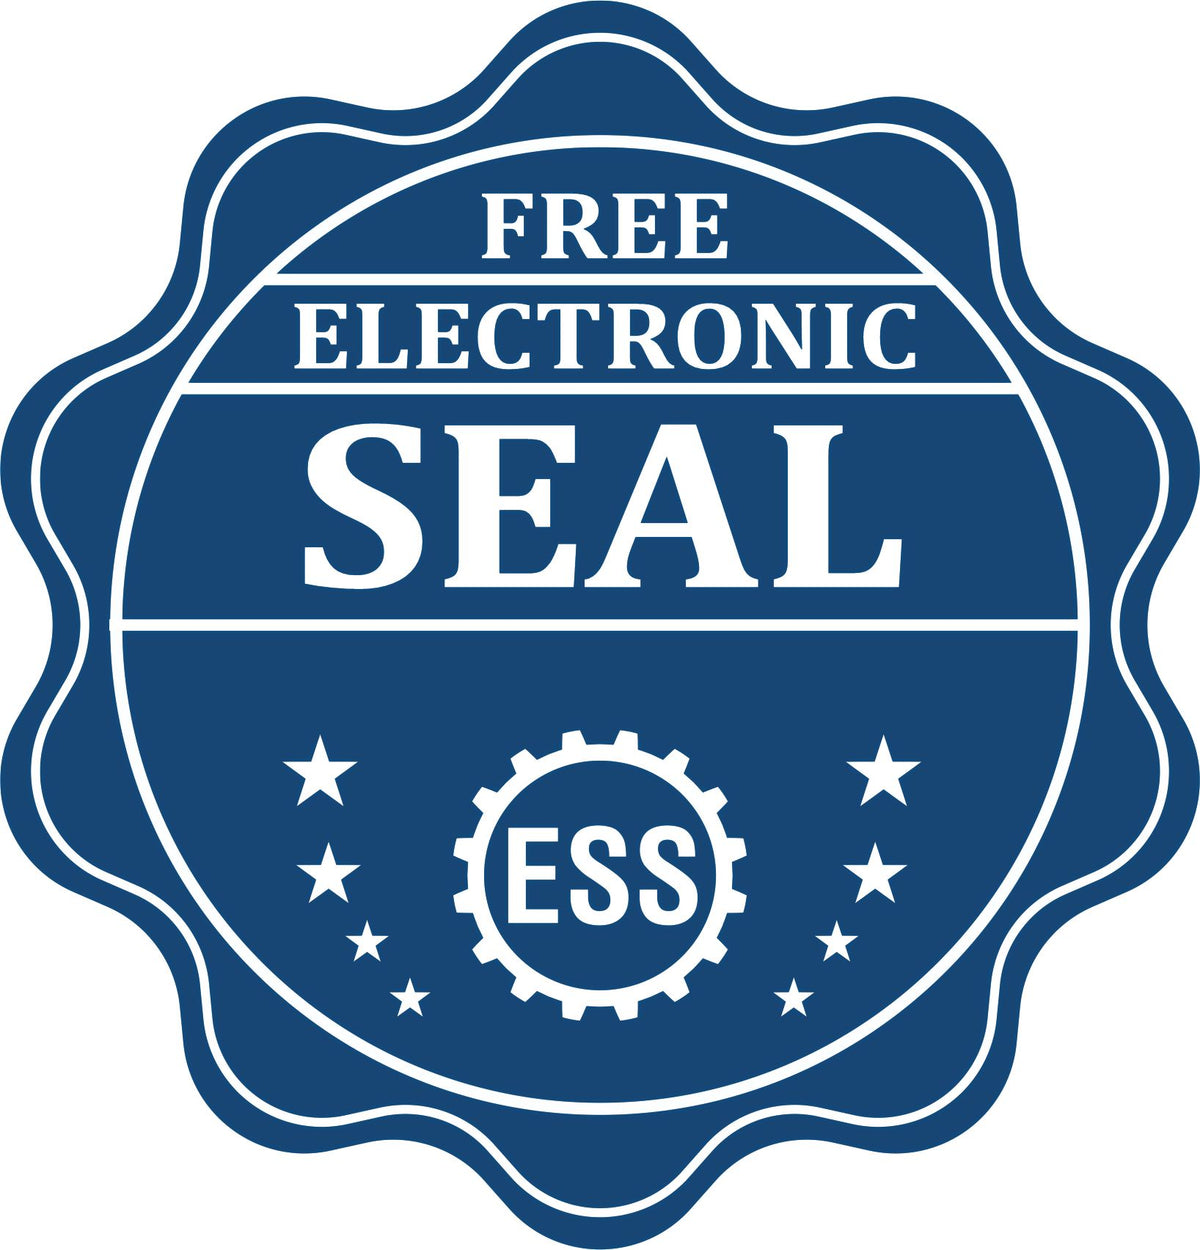 A badge showing a free electronic seal for the Premium MaxLight Pre-Inked Louisiana Engineering Stamp with stars and the ESS gear on the emblem.